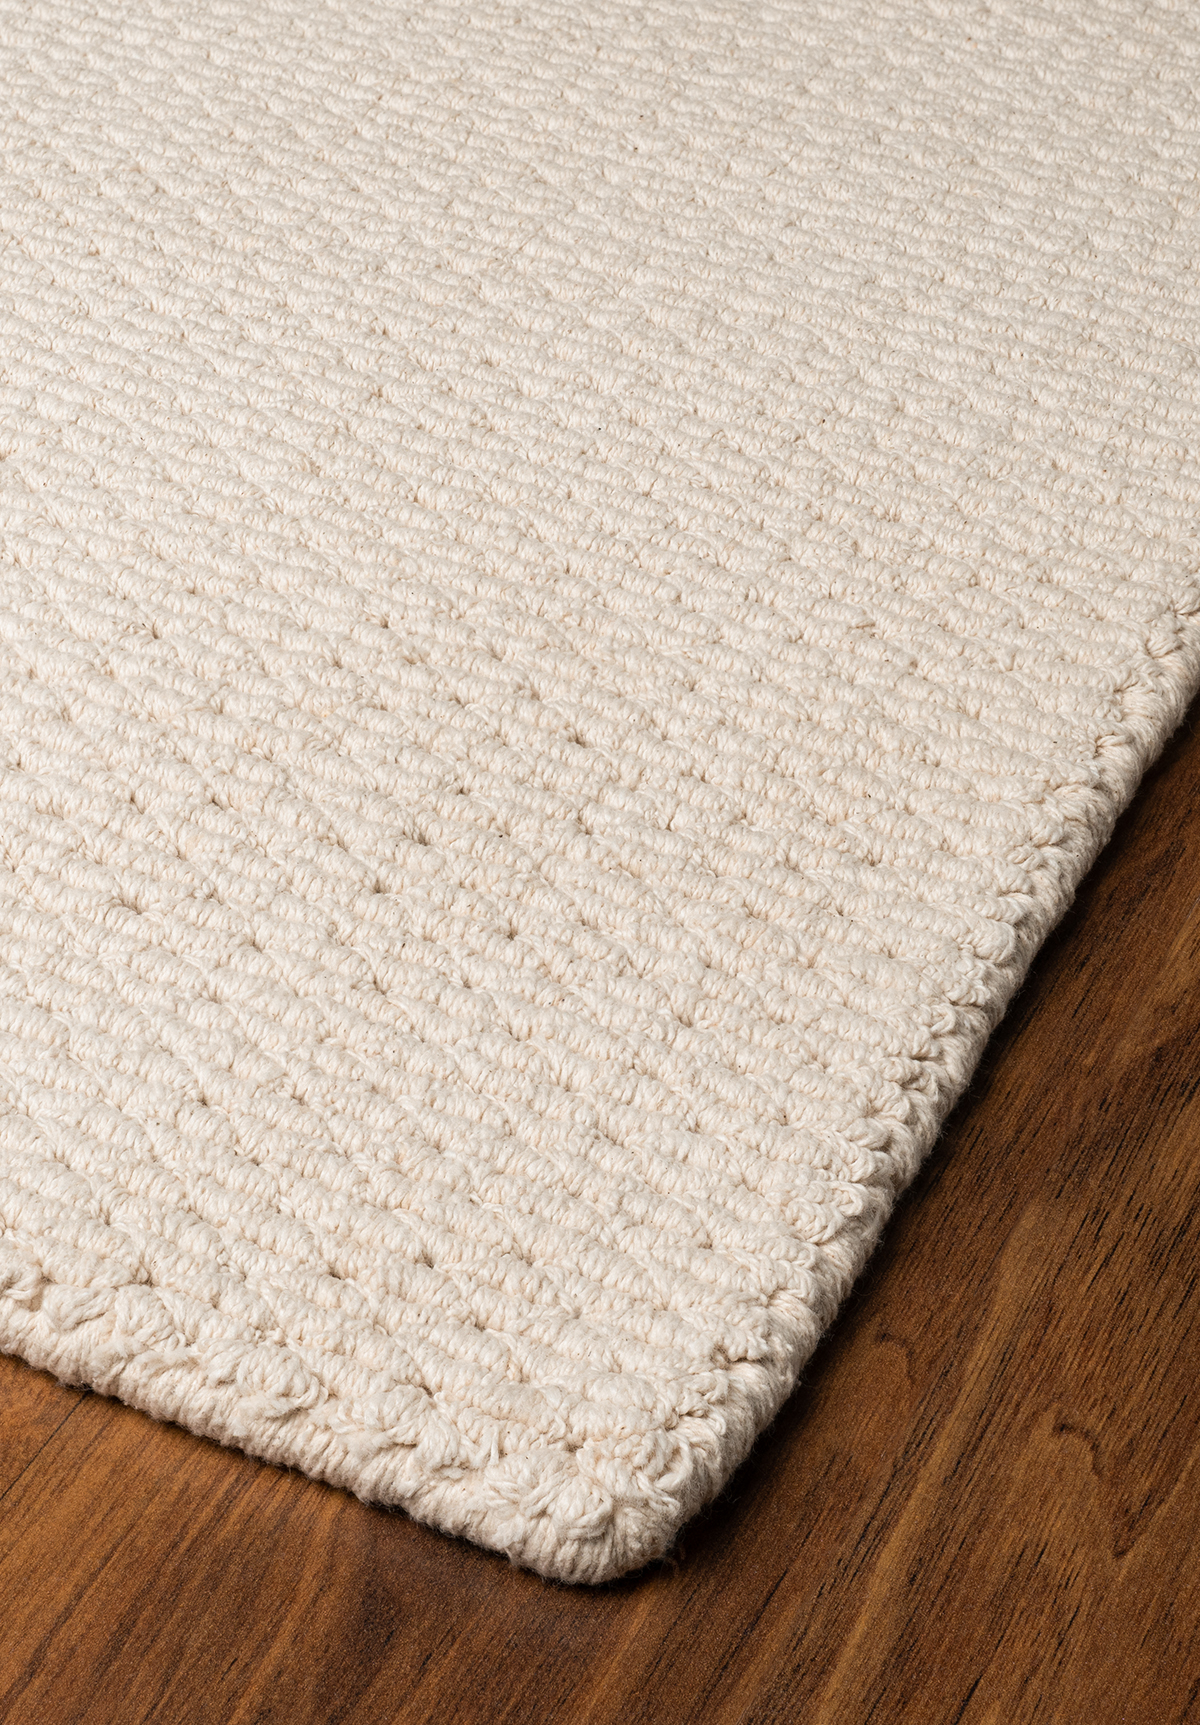 https://a4a2d5d7.rocketcdn.me/images/airloom-organic-cotton-loom-hooked-rug-935G-profile.jpg